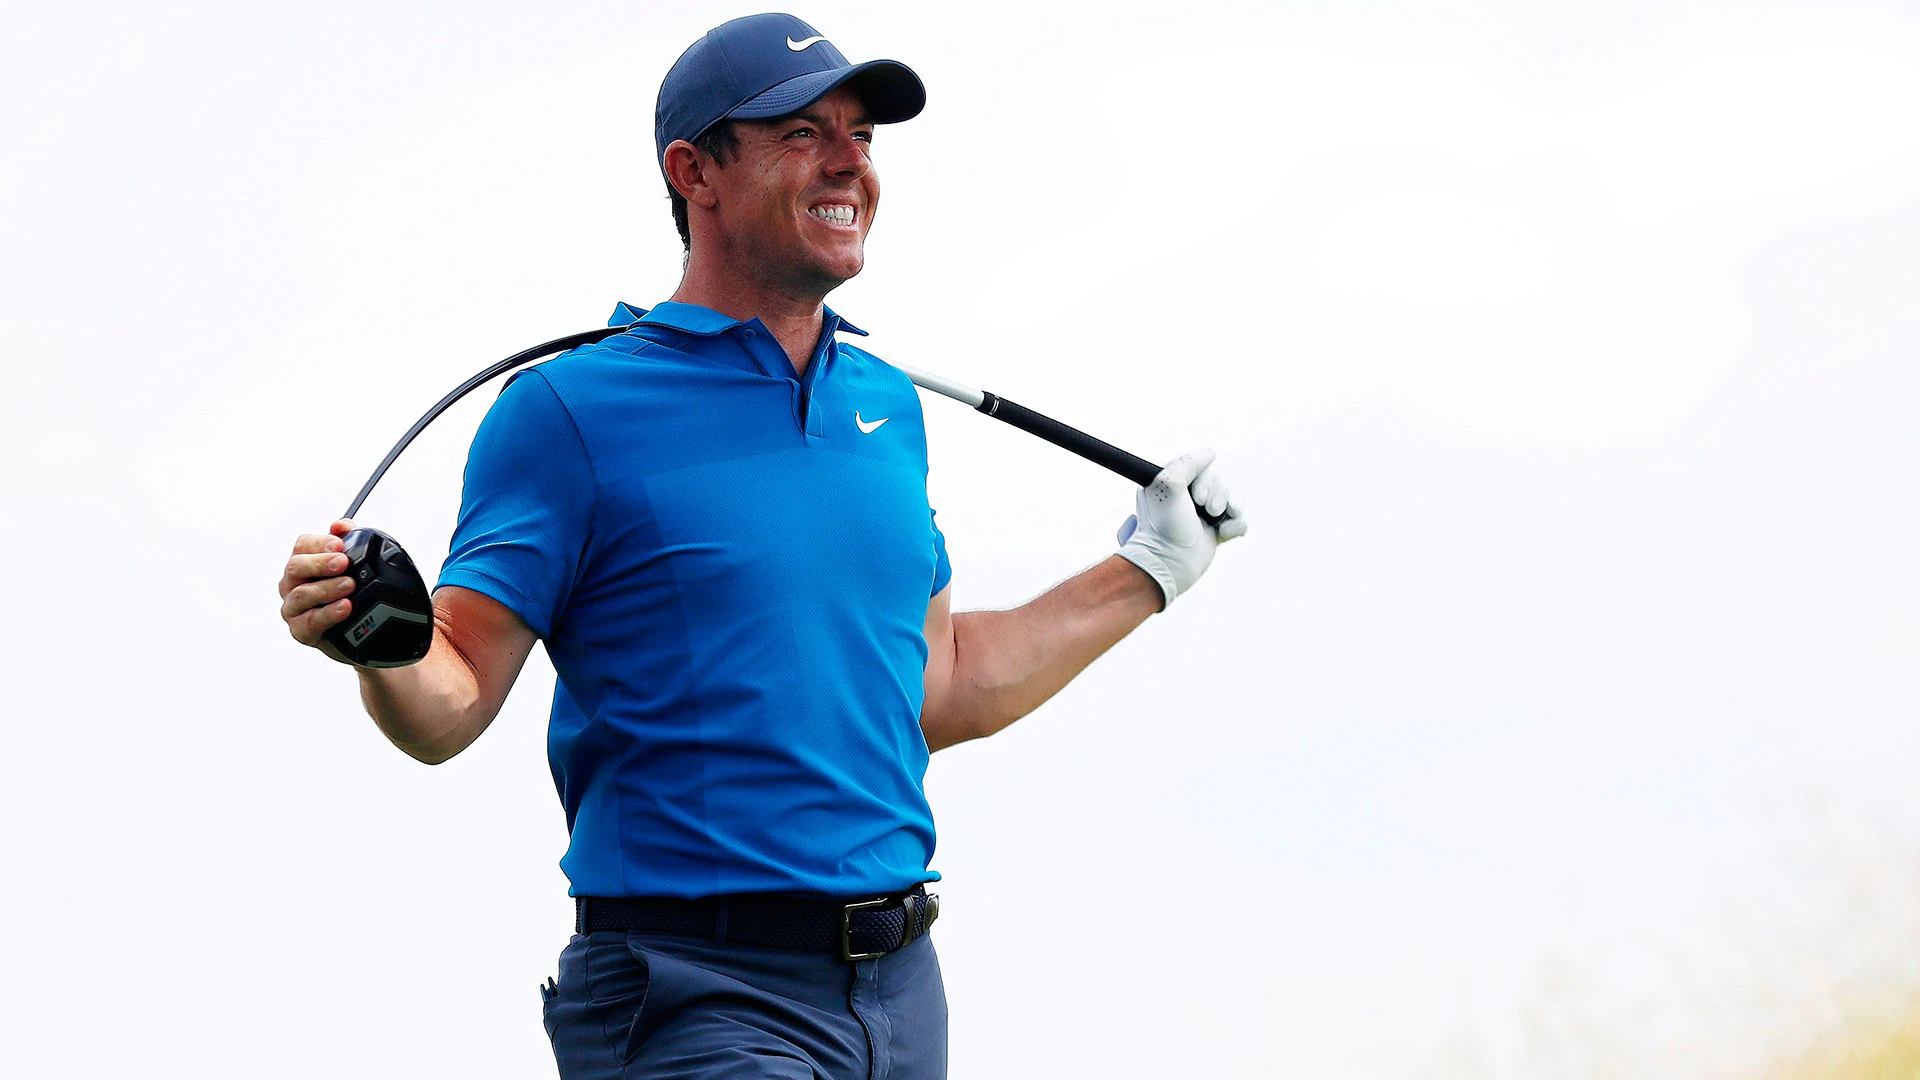 Despite 'flattering' stats, McIlroy has work to do